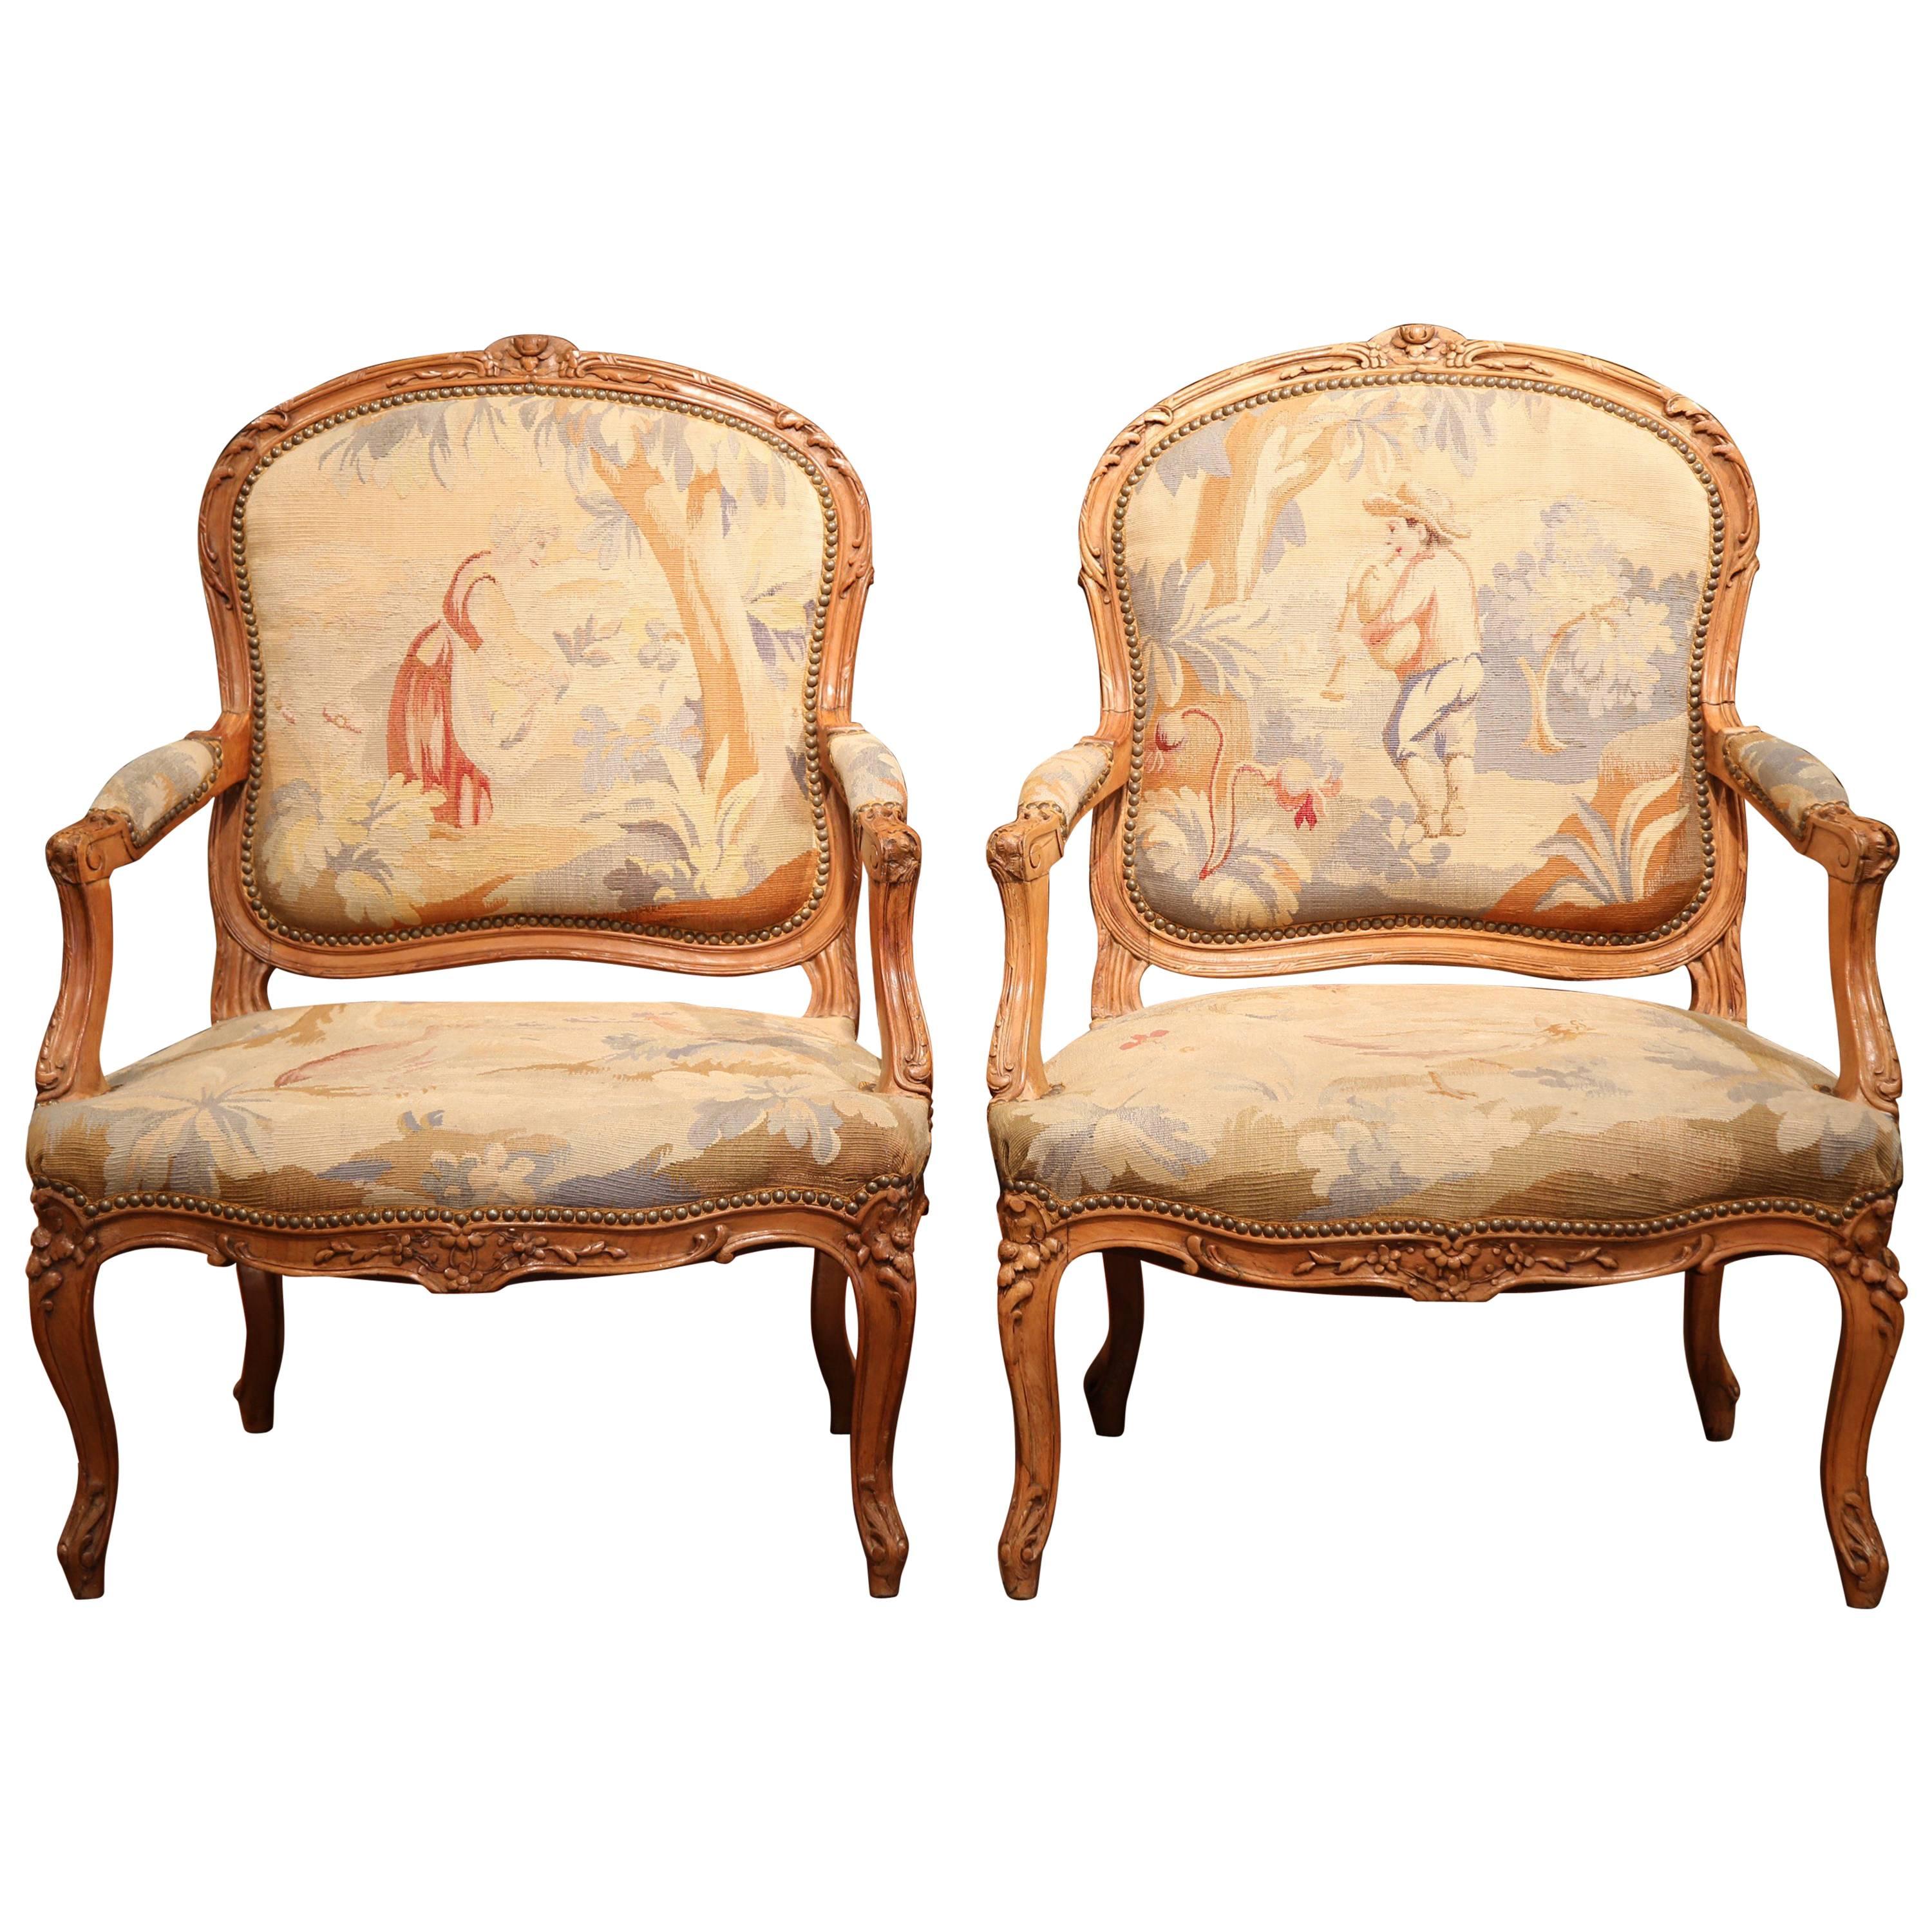 Pair of 19th Century French Louis XV Carved Armchairs with Aubusson Tapestry